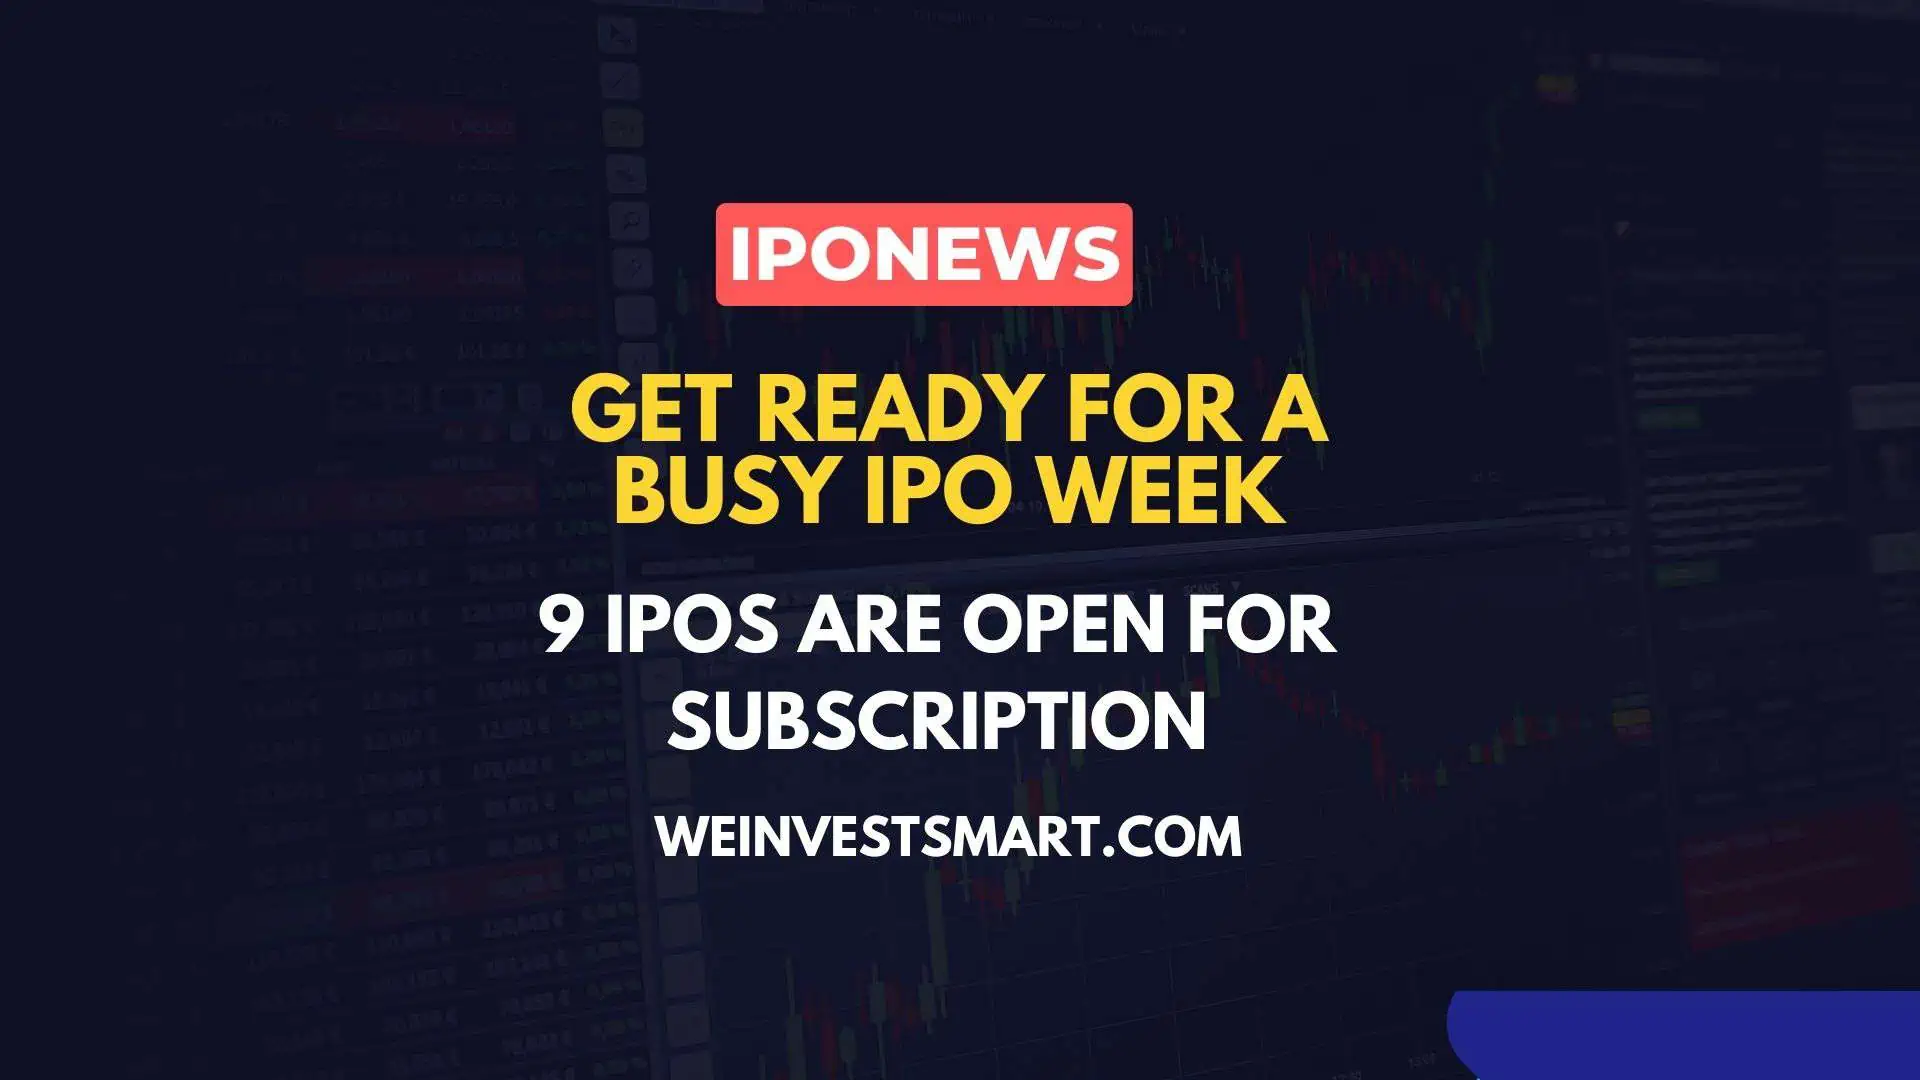 Get ready for a busy IPO week - 9 IPOs are open for subscription